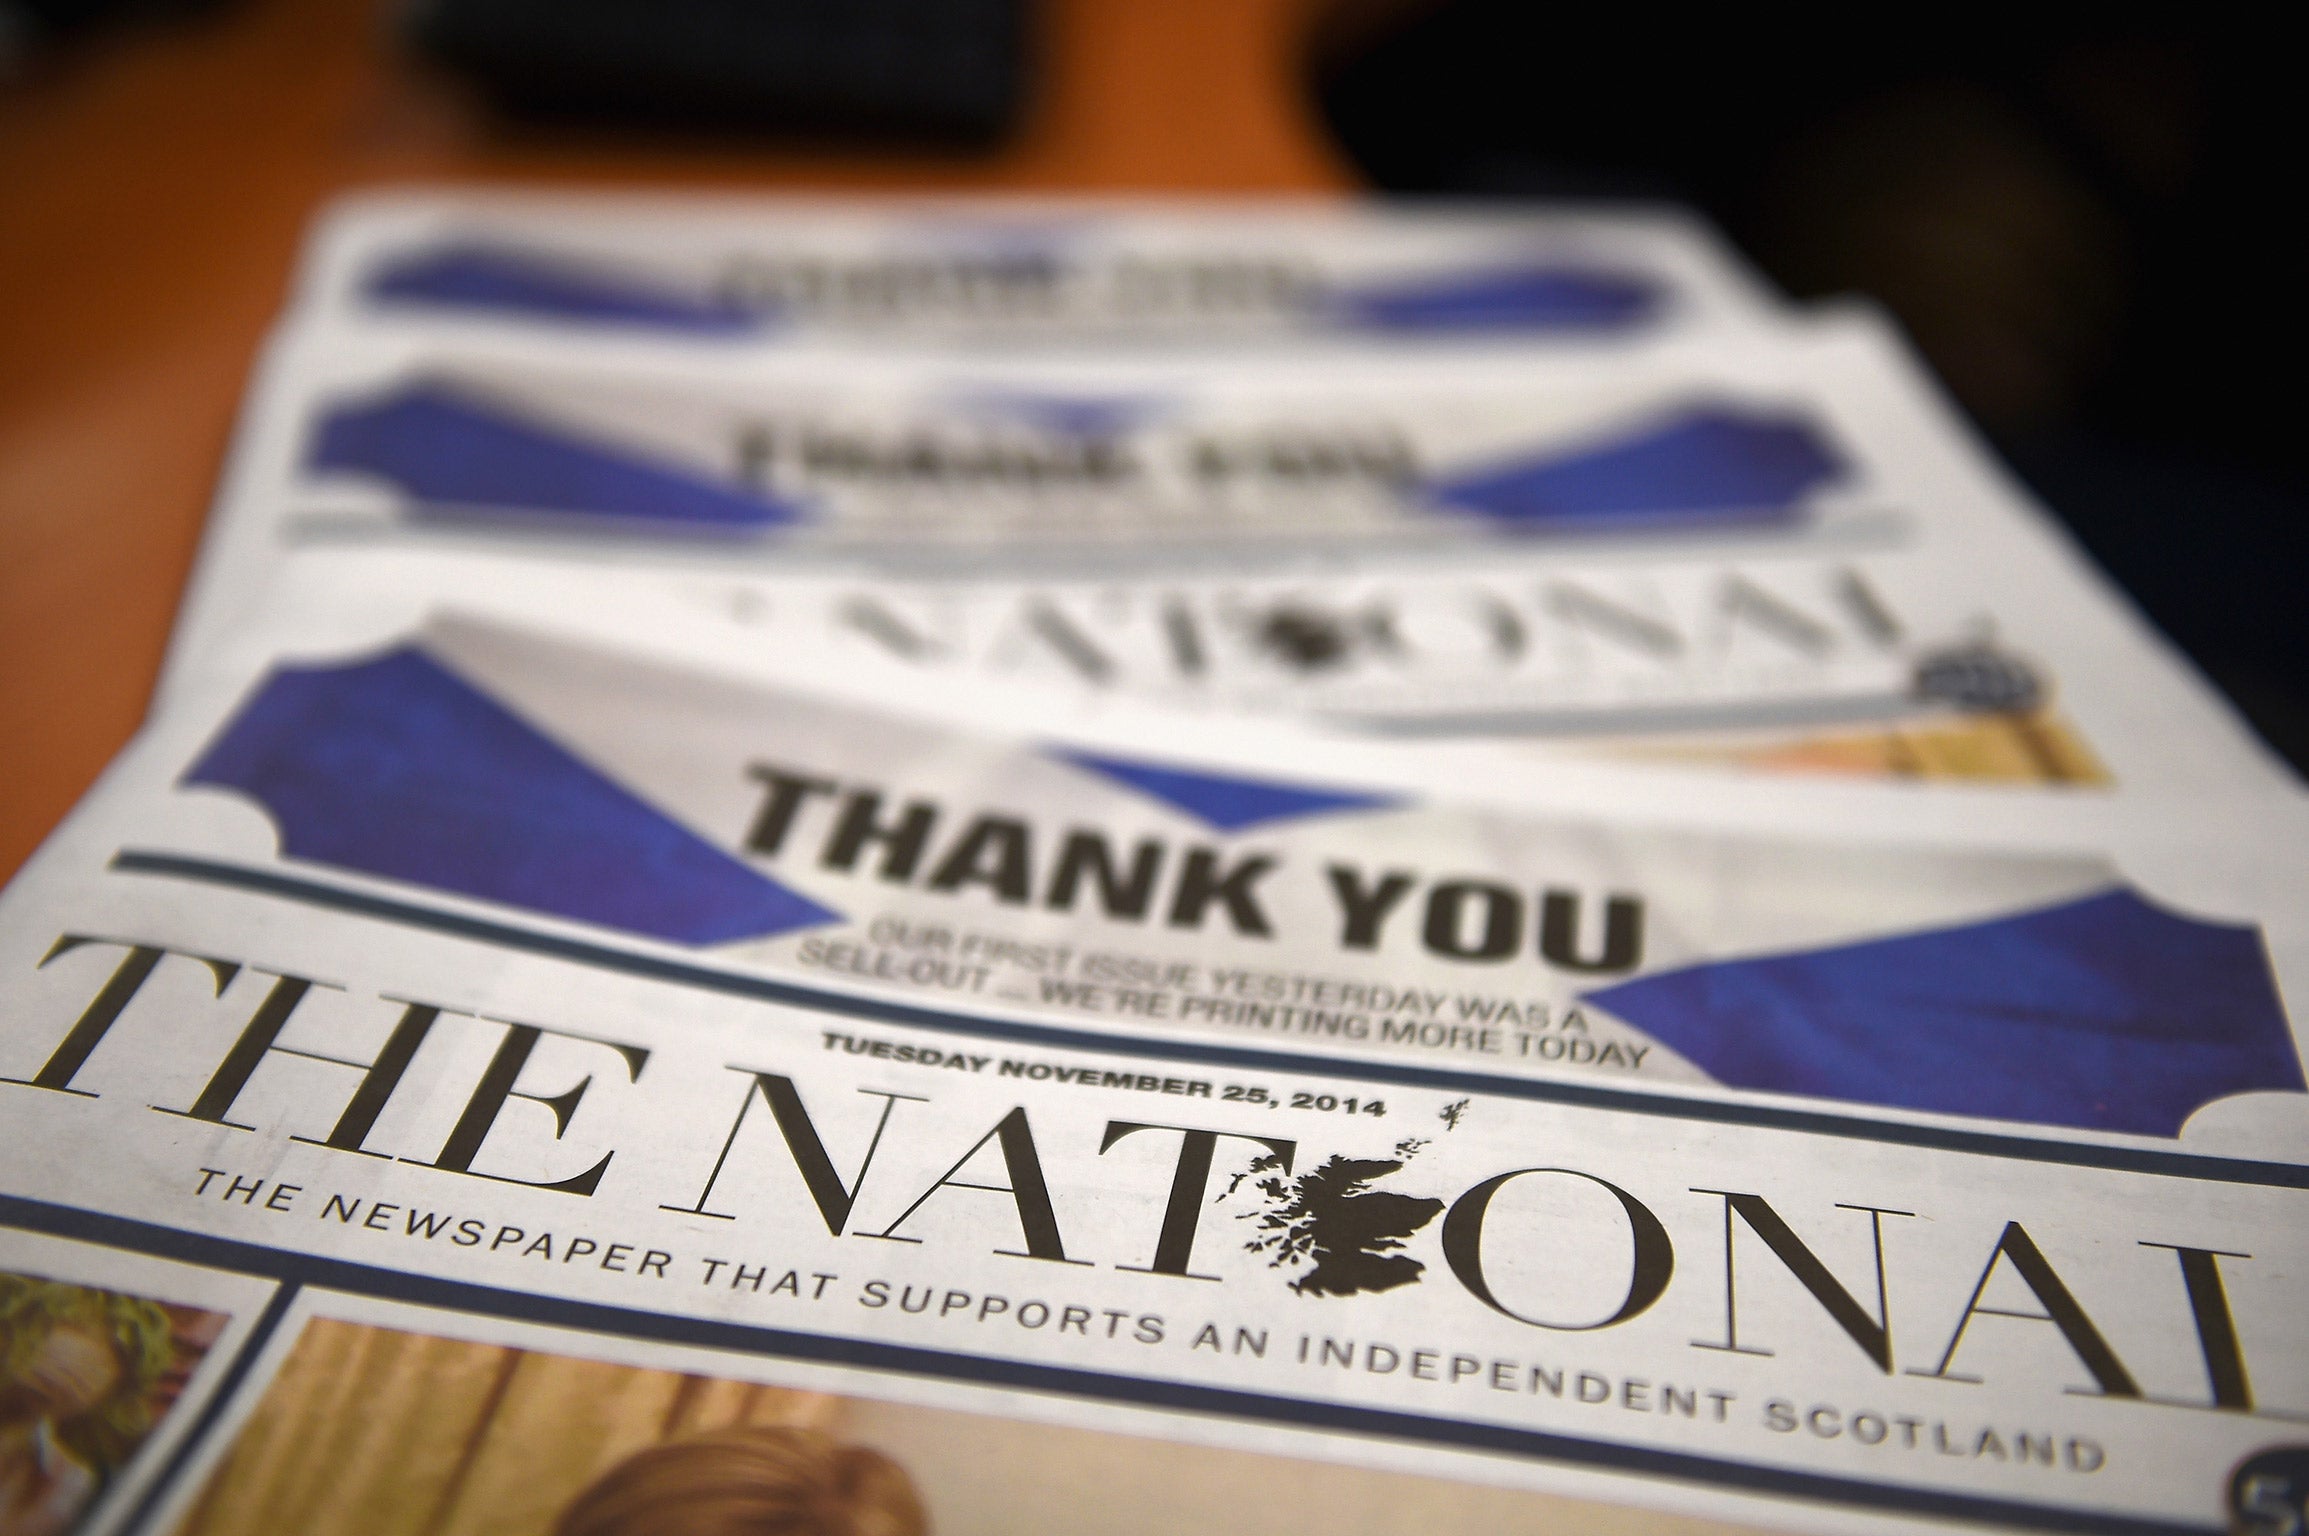 Salmond's article appears in The National, which launched following the failed bid for independence in 2014 (Getty)